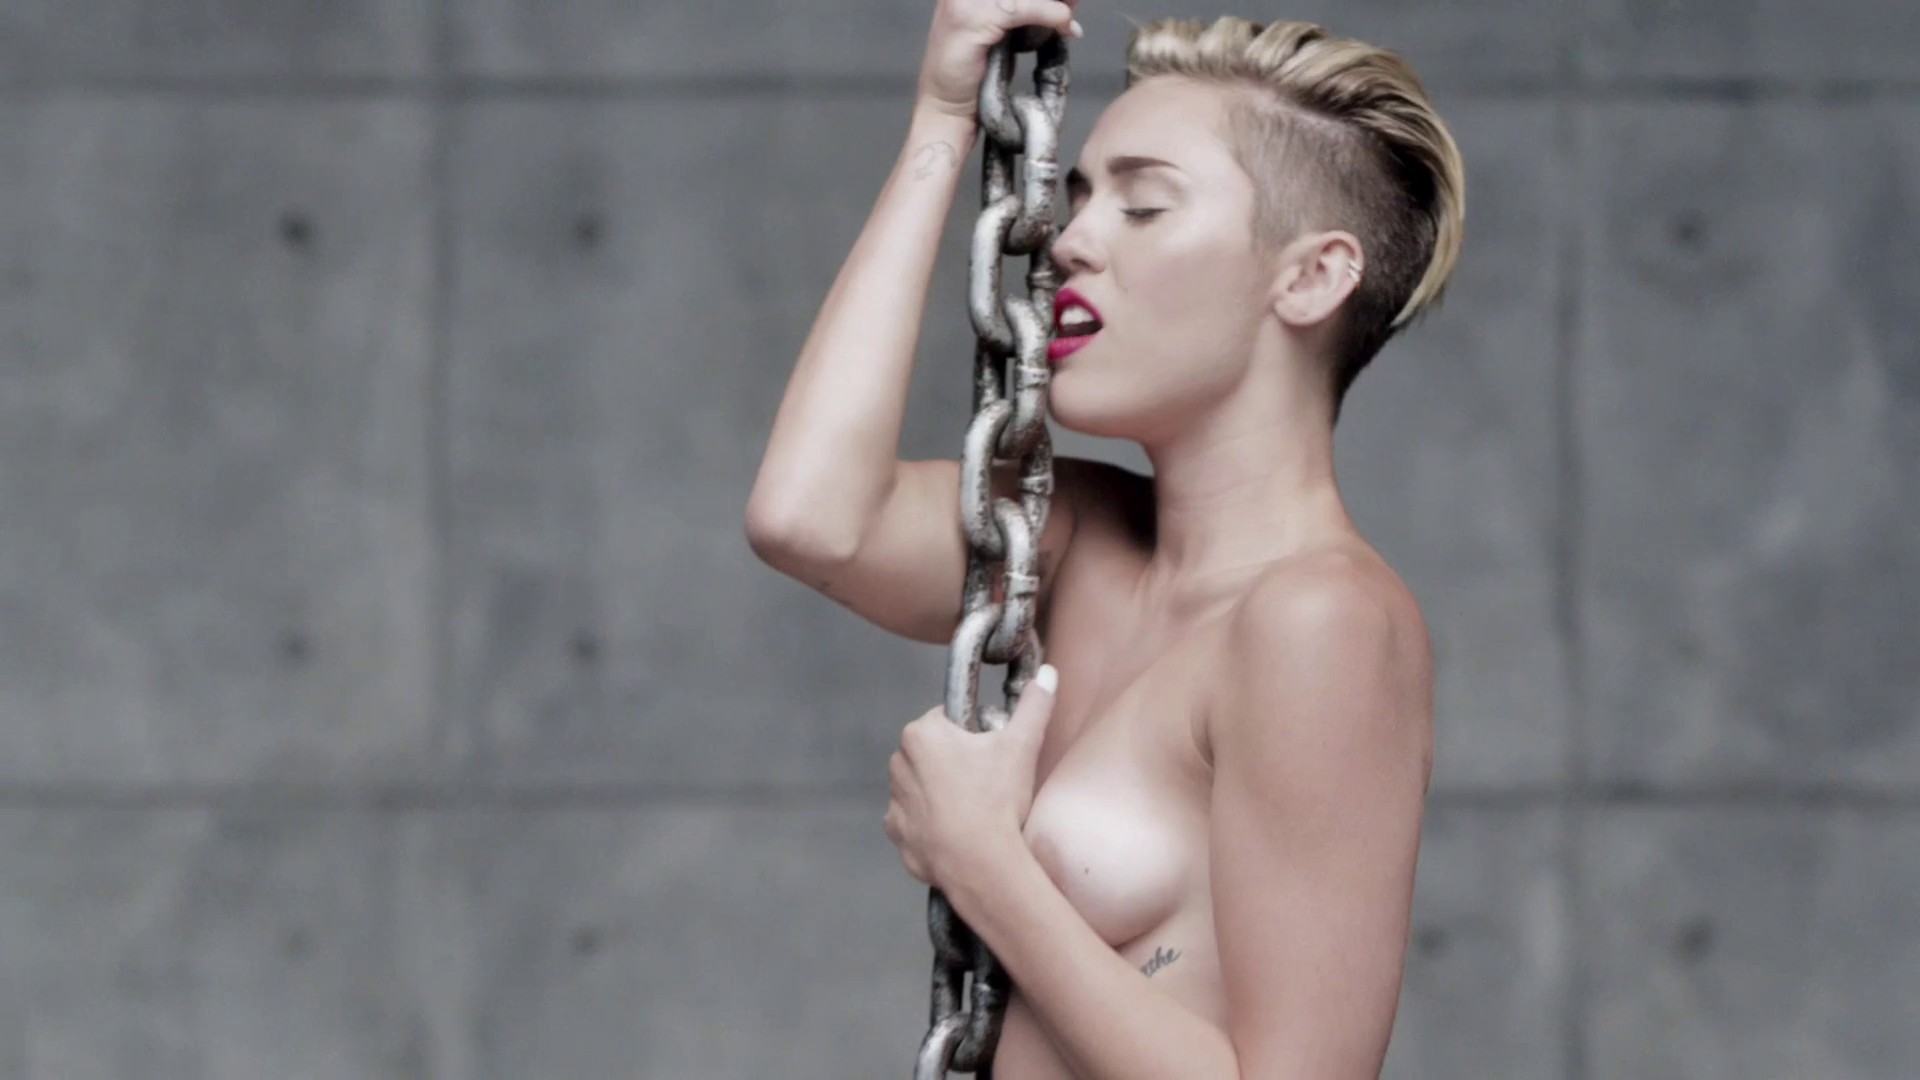 Miley Cyrus - Wrecking Ball explicit uncensored video 1080p2813.jpg